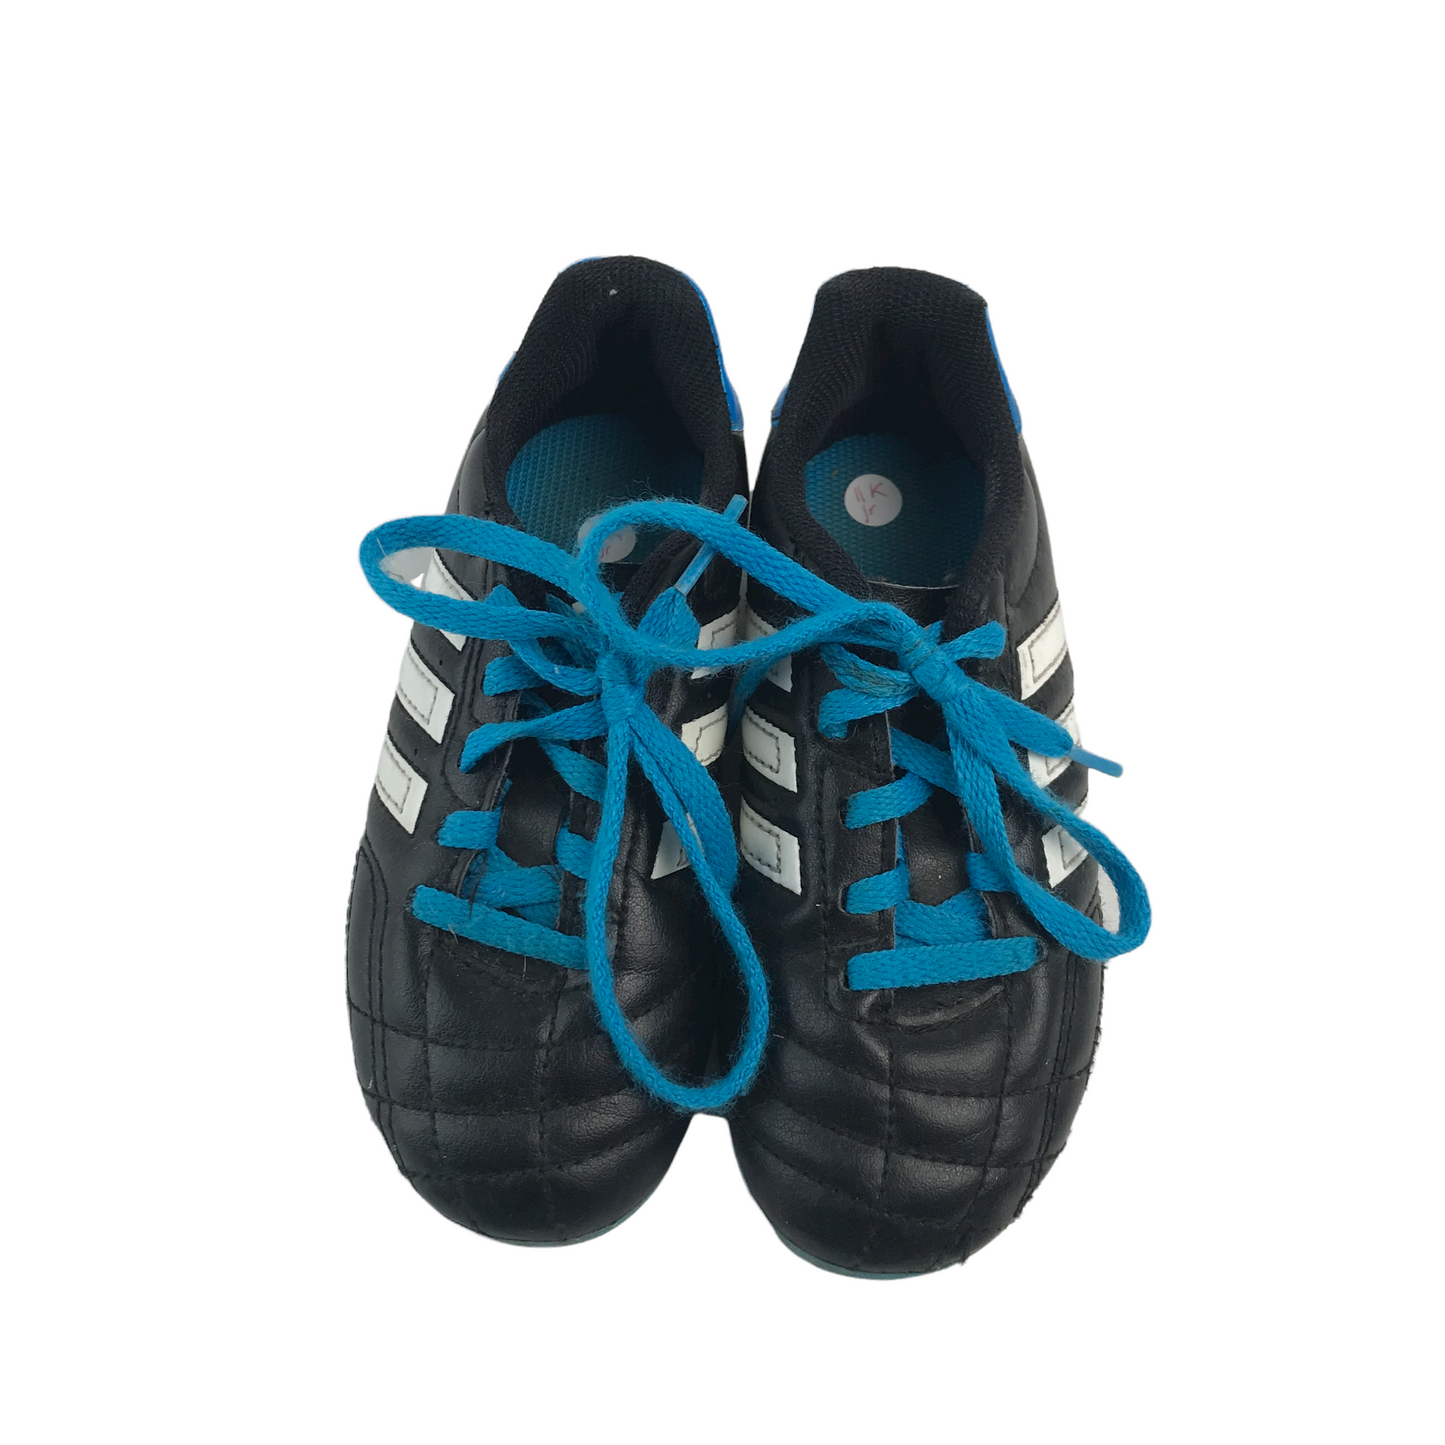 Adidas Black and Blue Football Boots Shoe Size 11K (jr)